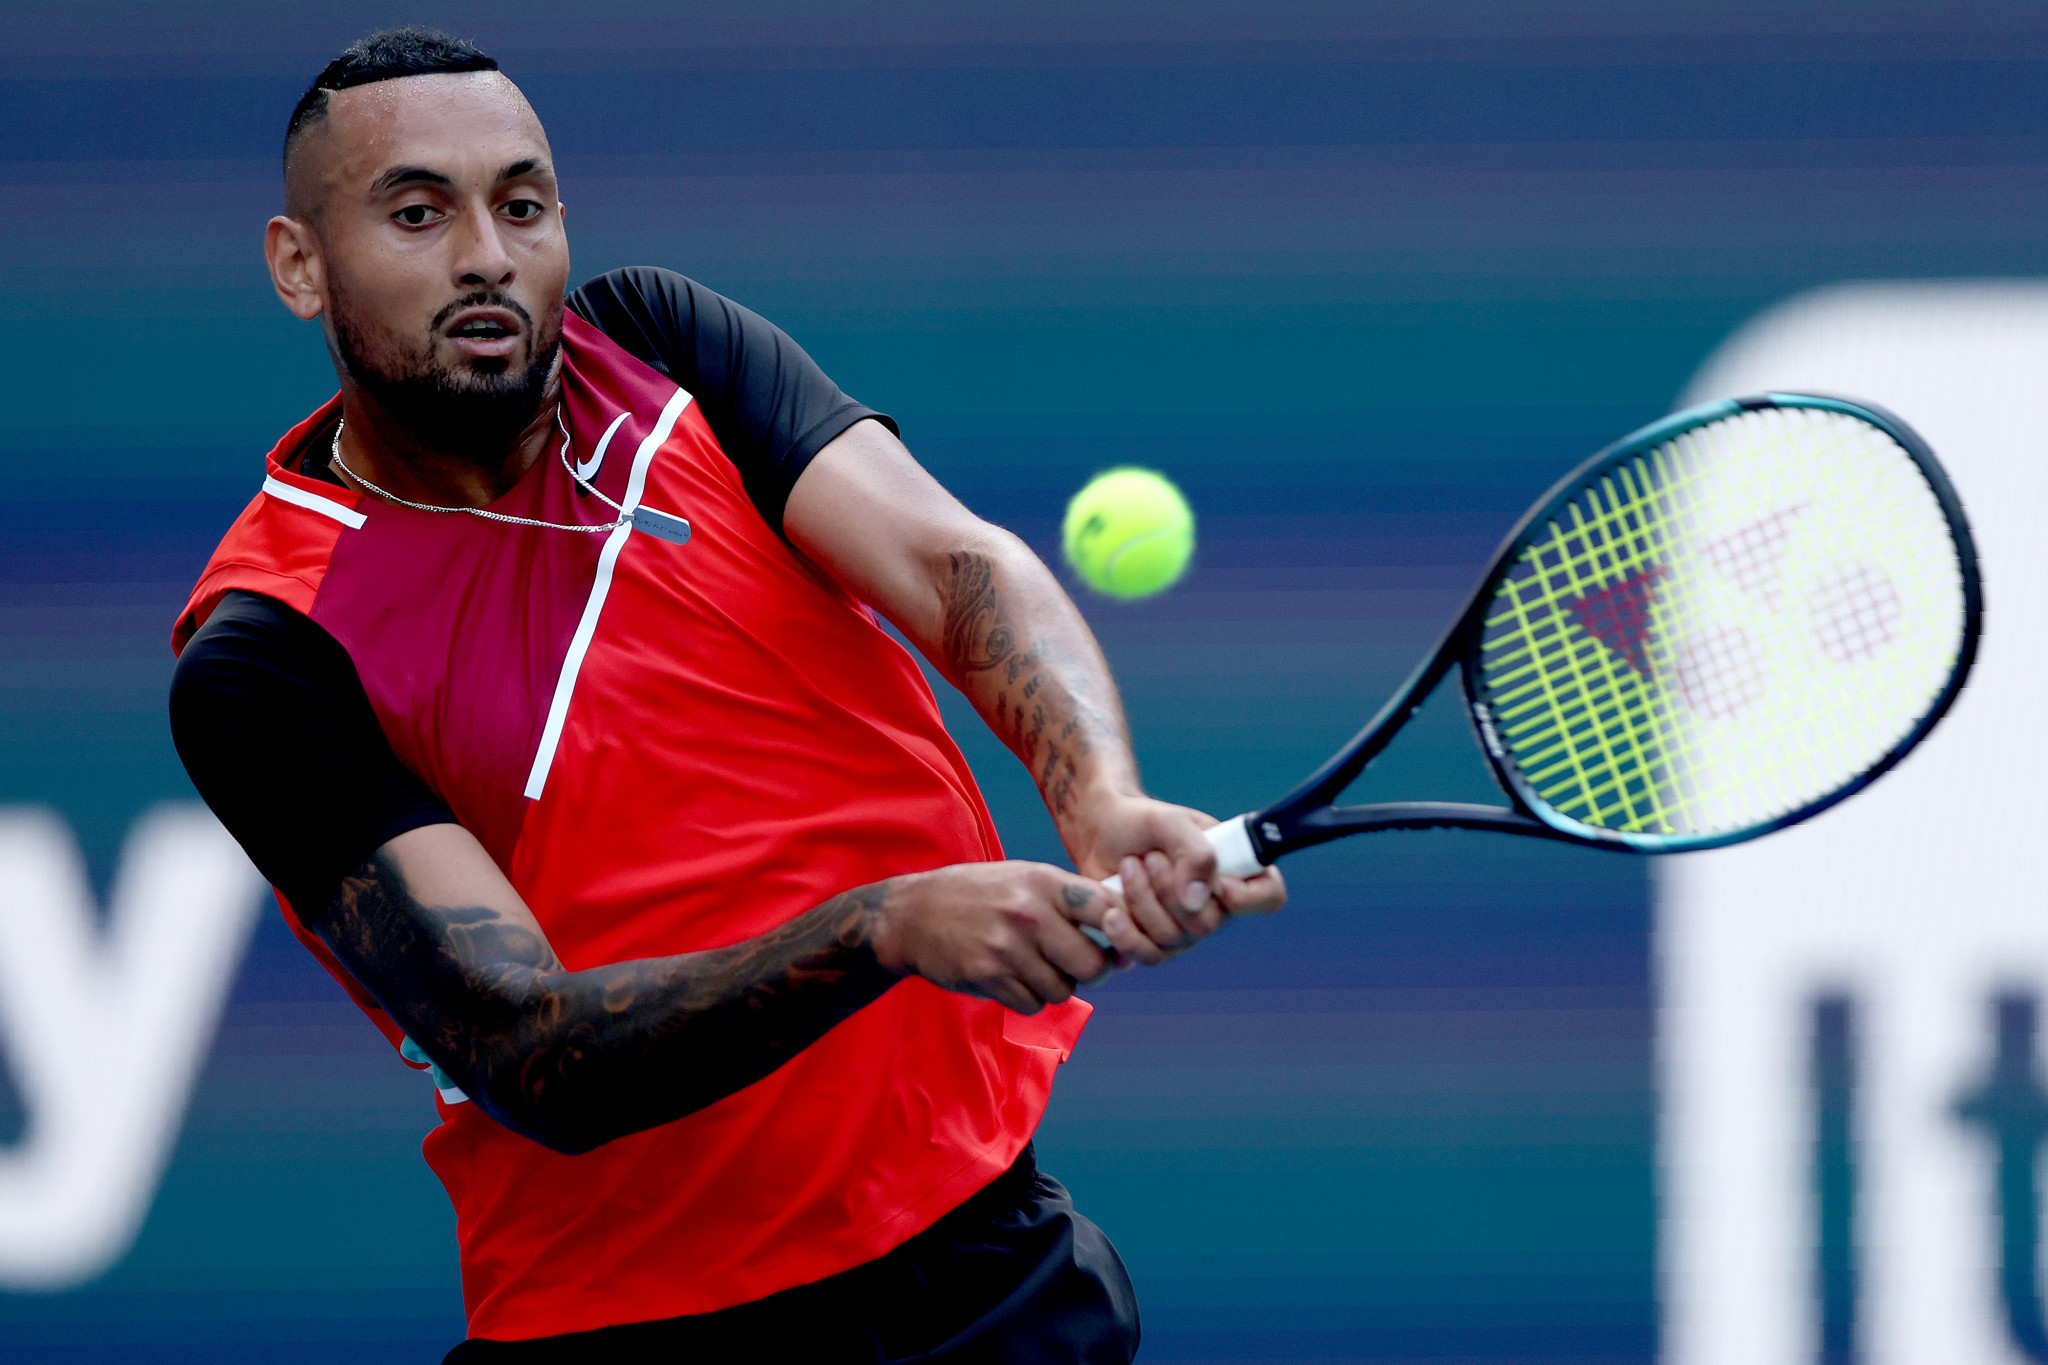 Nick Kyrgios thrashed Andrey Rublev to advance to the third round in Miami ©Getty Images